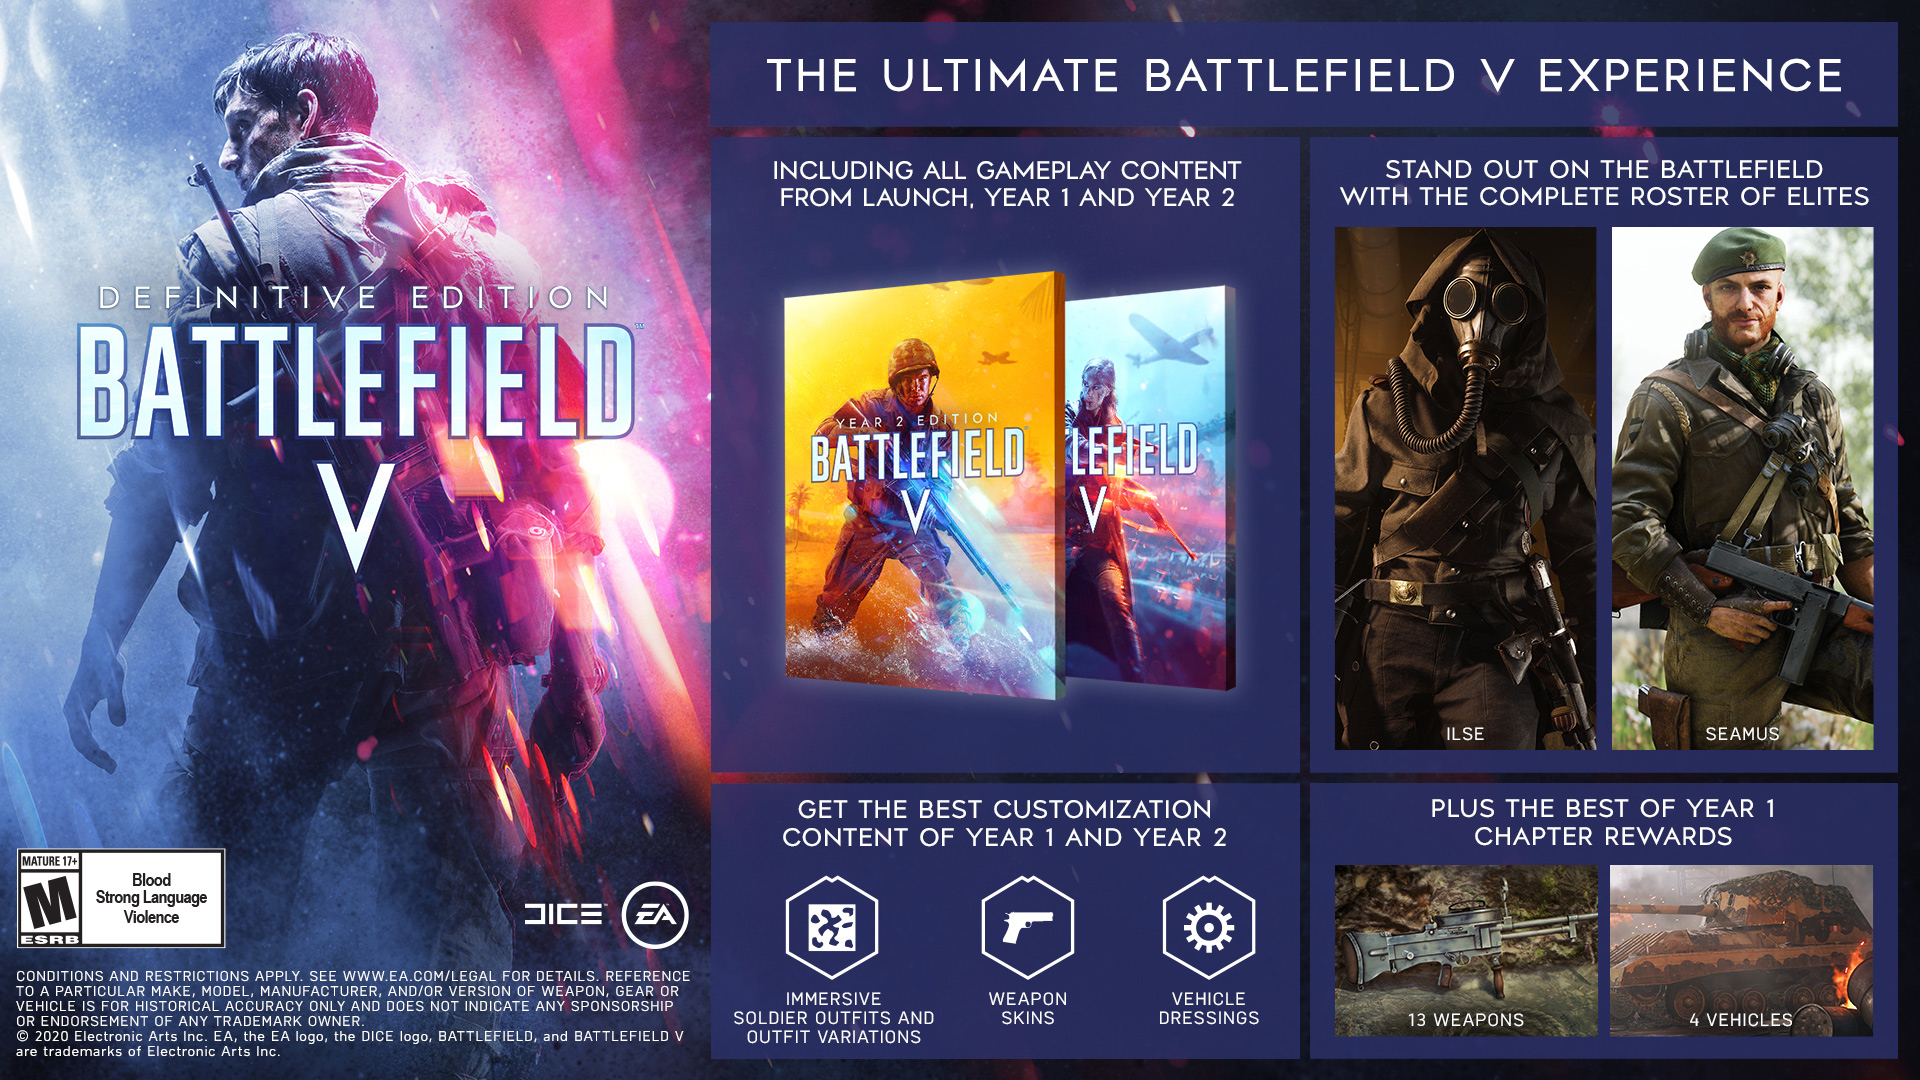 download the new for windows Battlefield V Definitive Edition